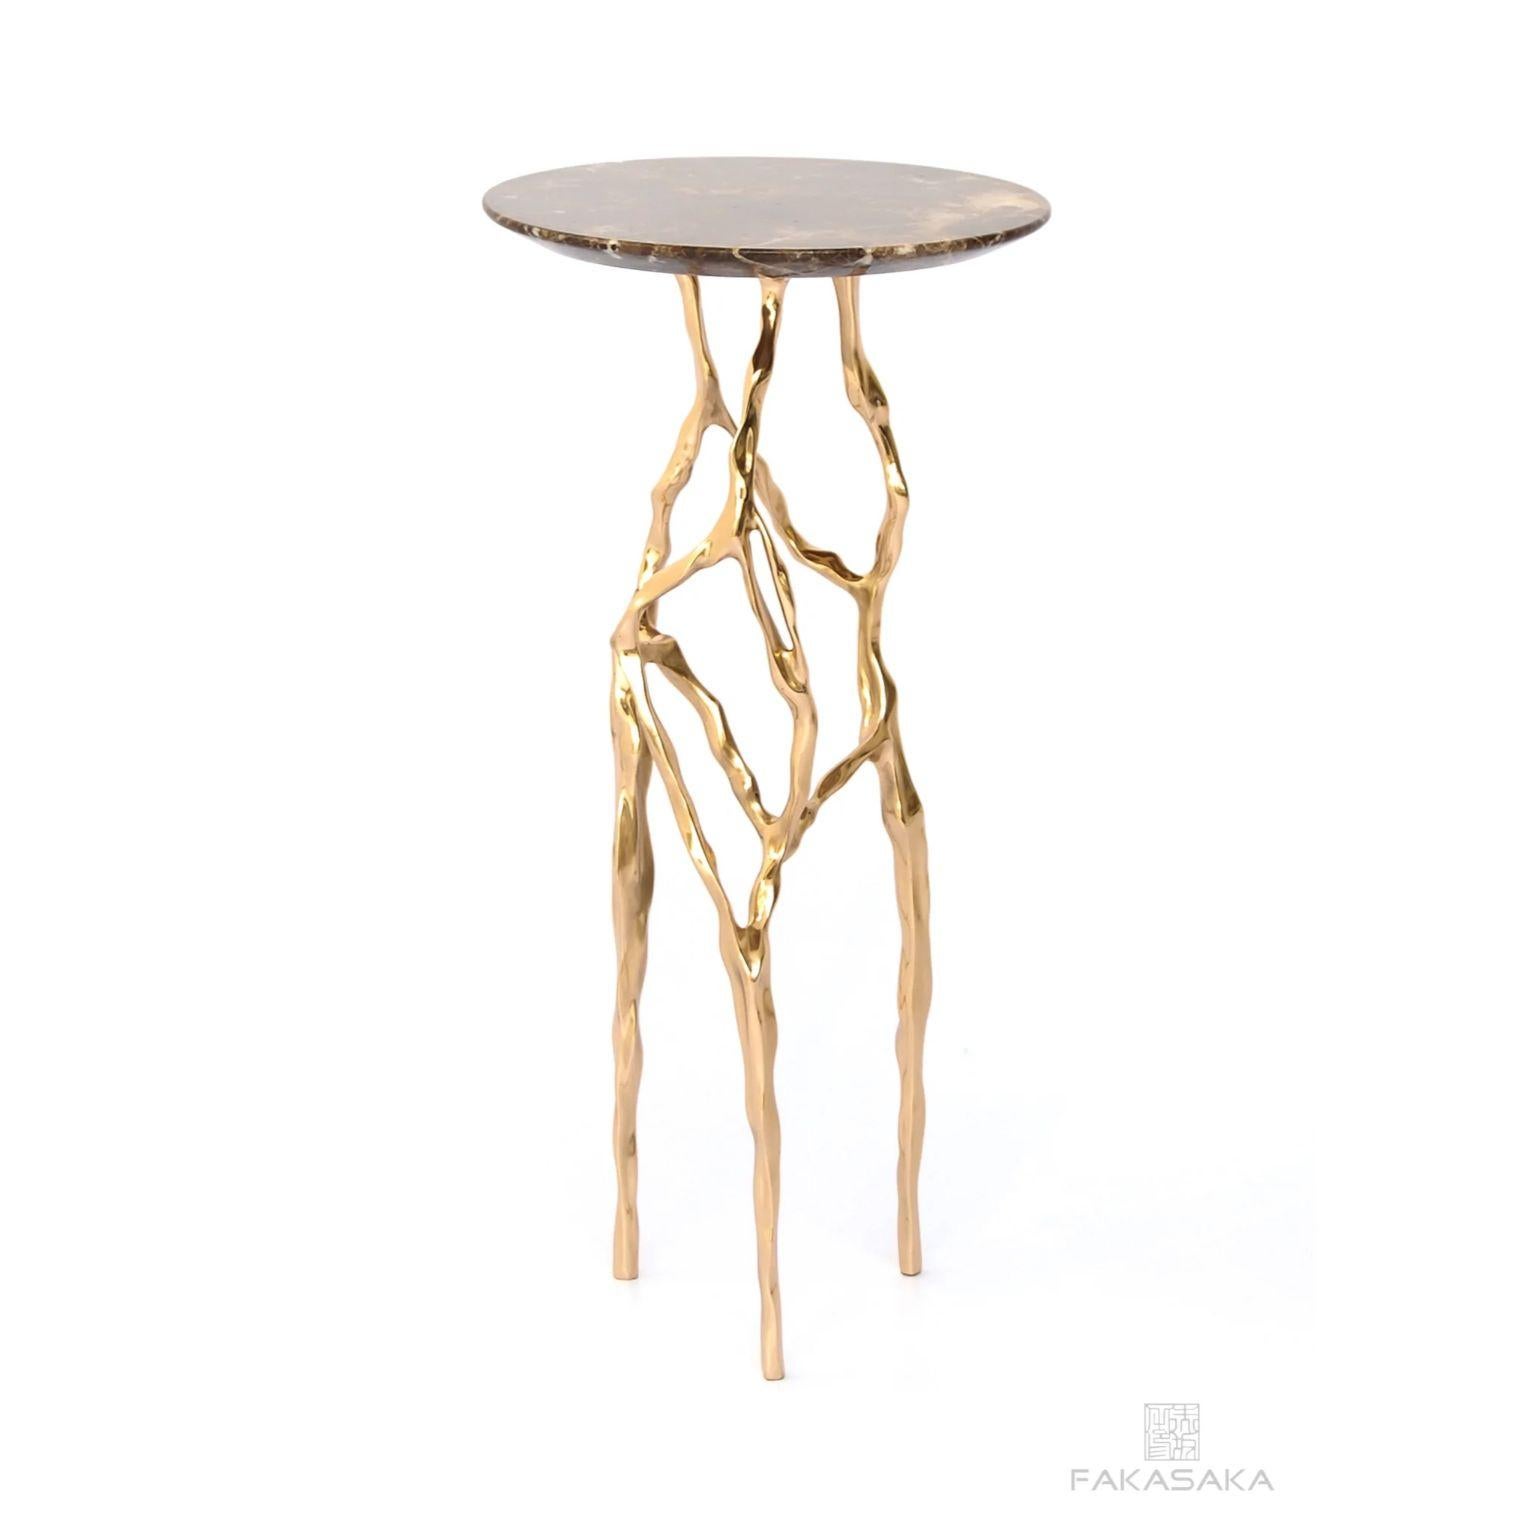 Sid drink table with Marrom Imperial Marble top by Fakasaka Design
Dimensions: W 30 cm, D 30 cm, H 61 cm.
Materials: polished bronze base, Marrom Imperial marble top.
 
Also available in different table top materials:
Nero Marquina Marble